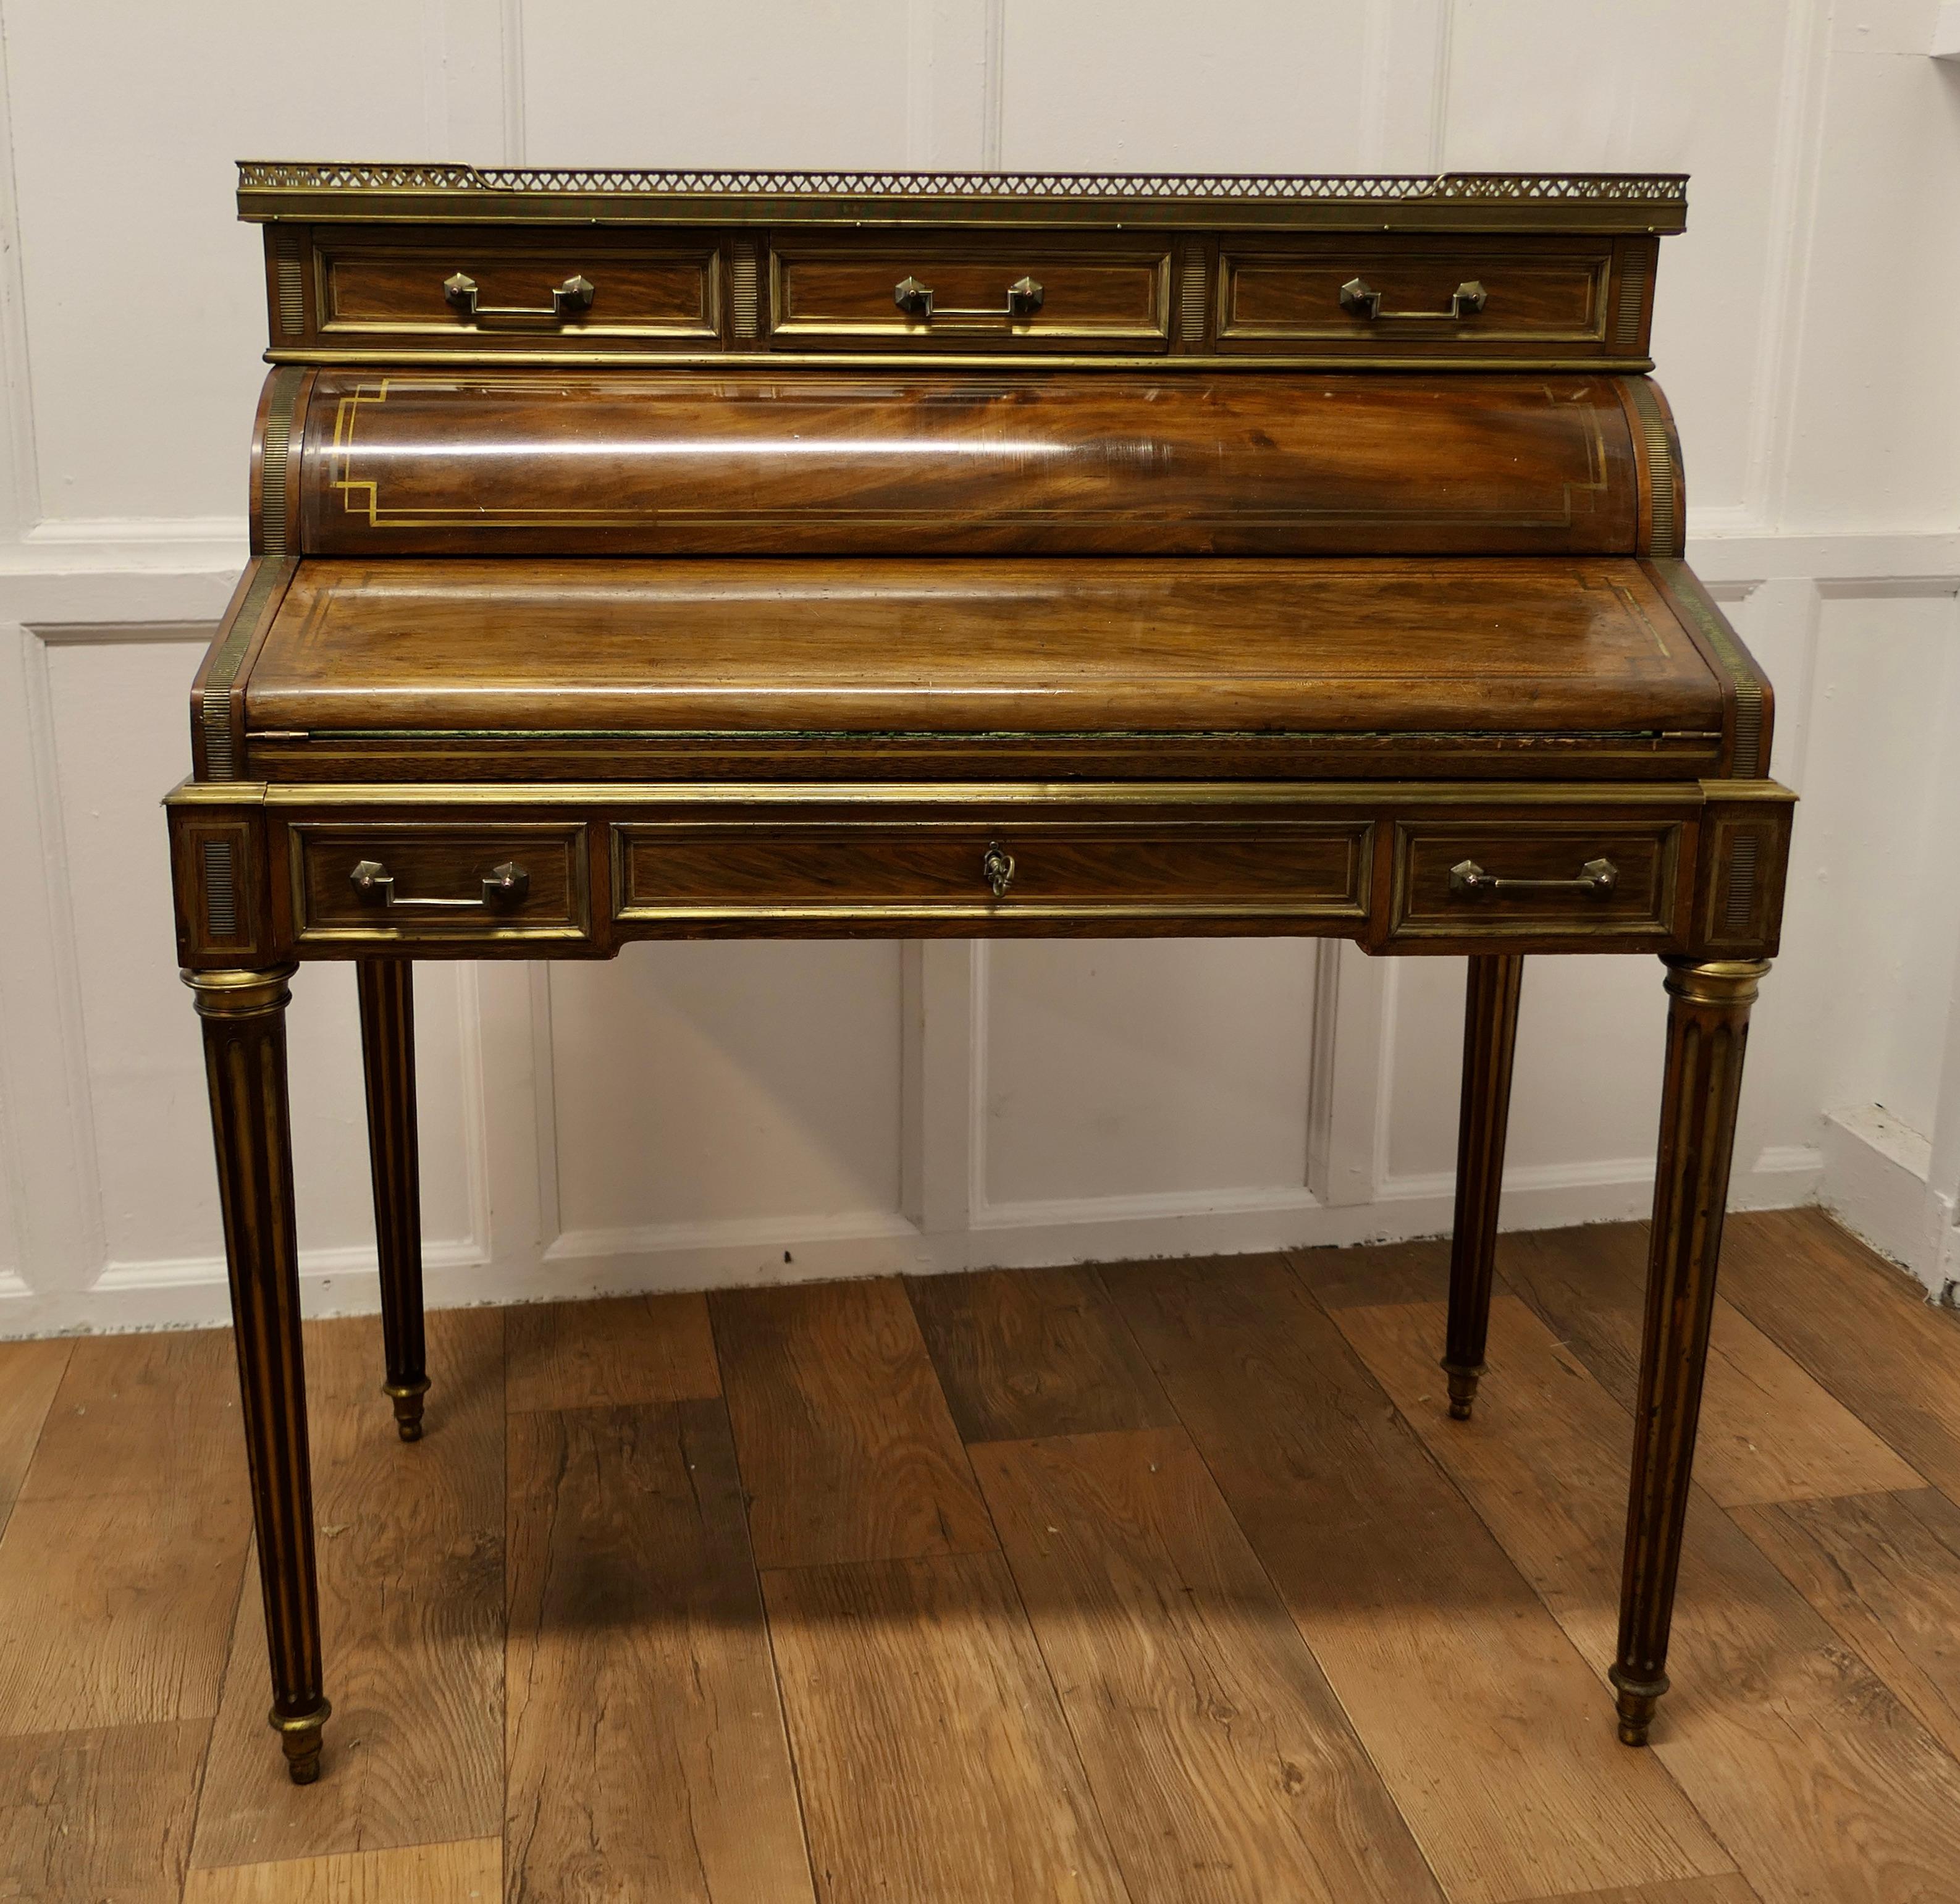 Italian Brass Inlaid Walnut Hotel Restaurant Reception Desk, Greeter

An Original Italian Front of House Walnut Greeter, this is a very imposing piece, it is in the finest figured woods and is inlaid in brass, front back  and sides even the legs